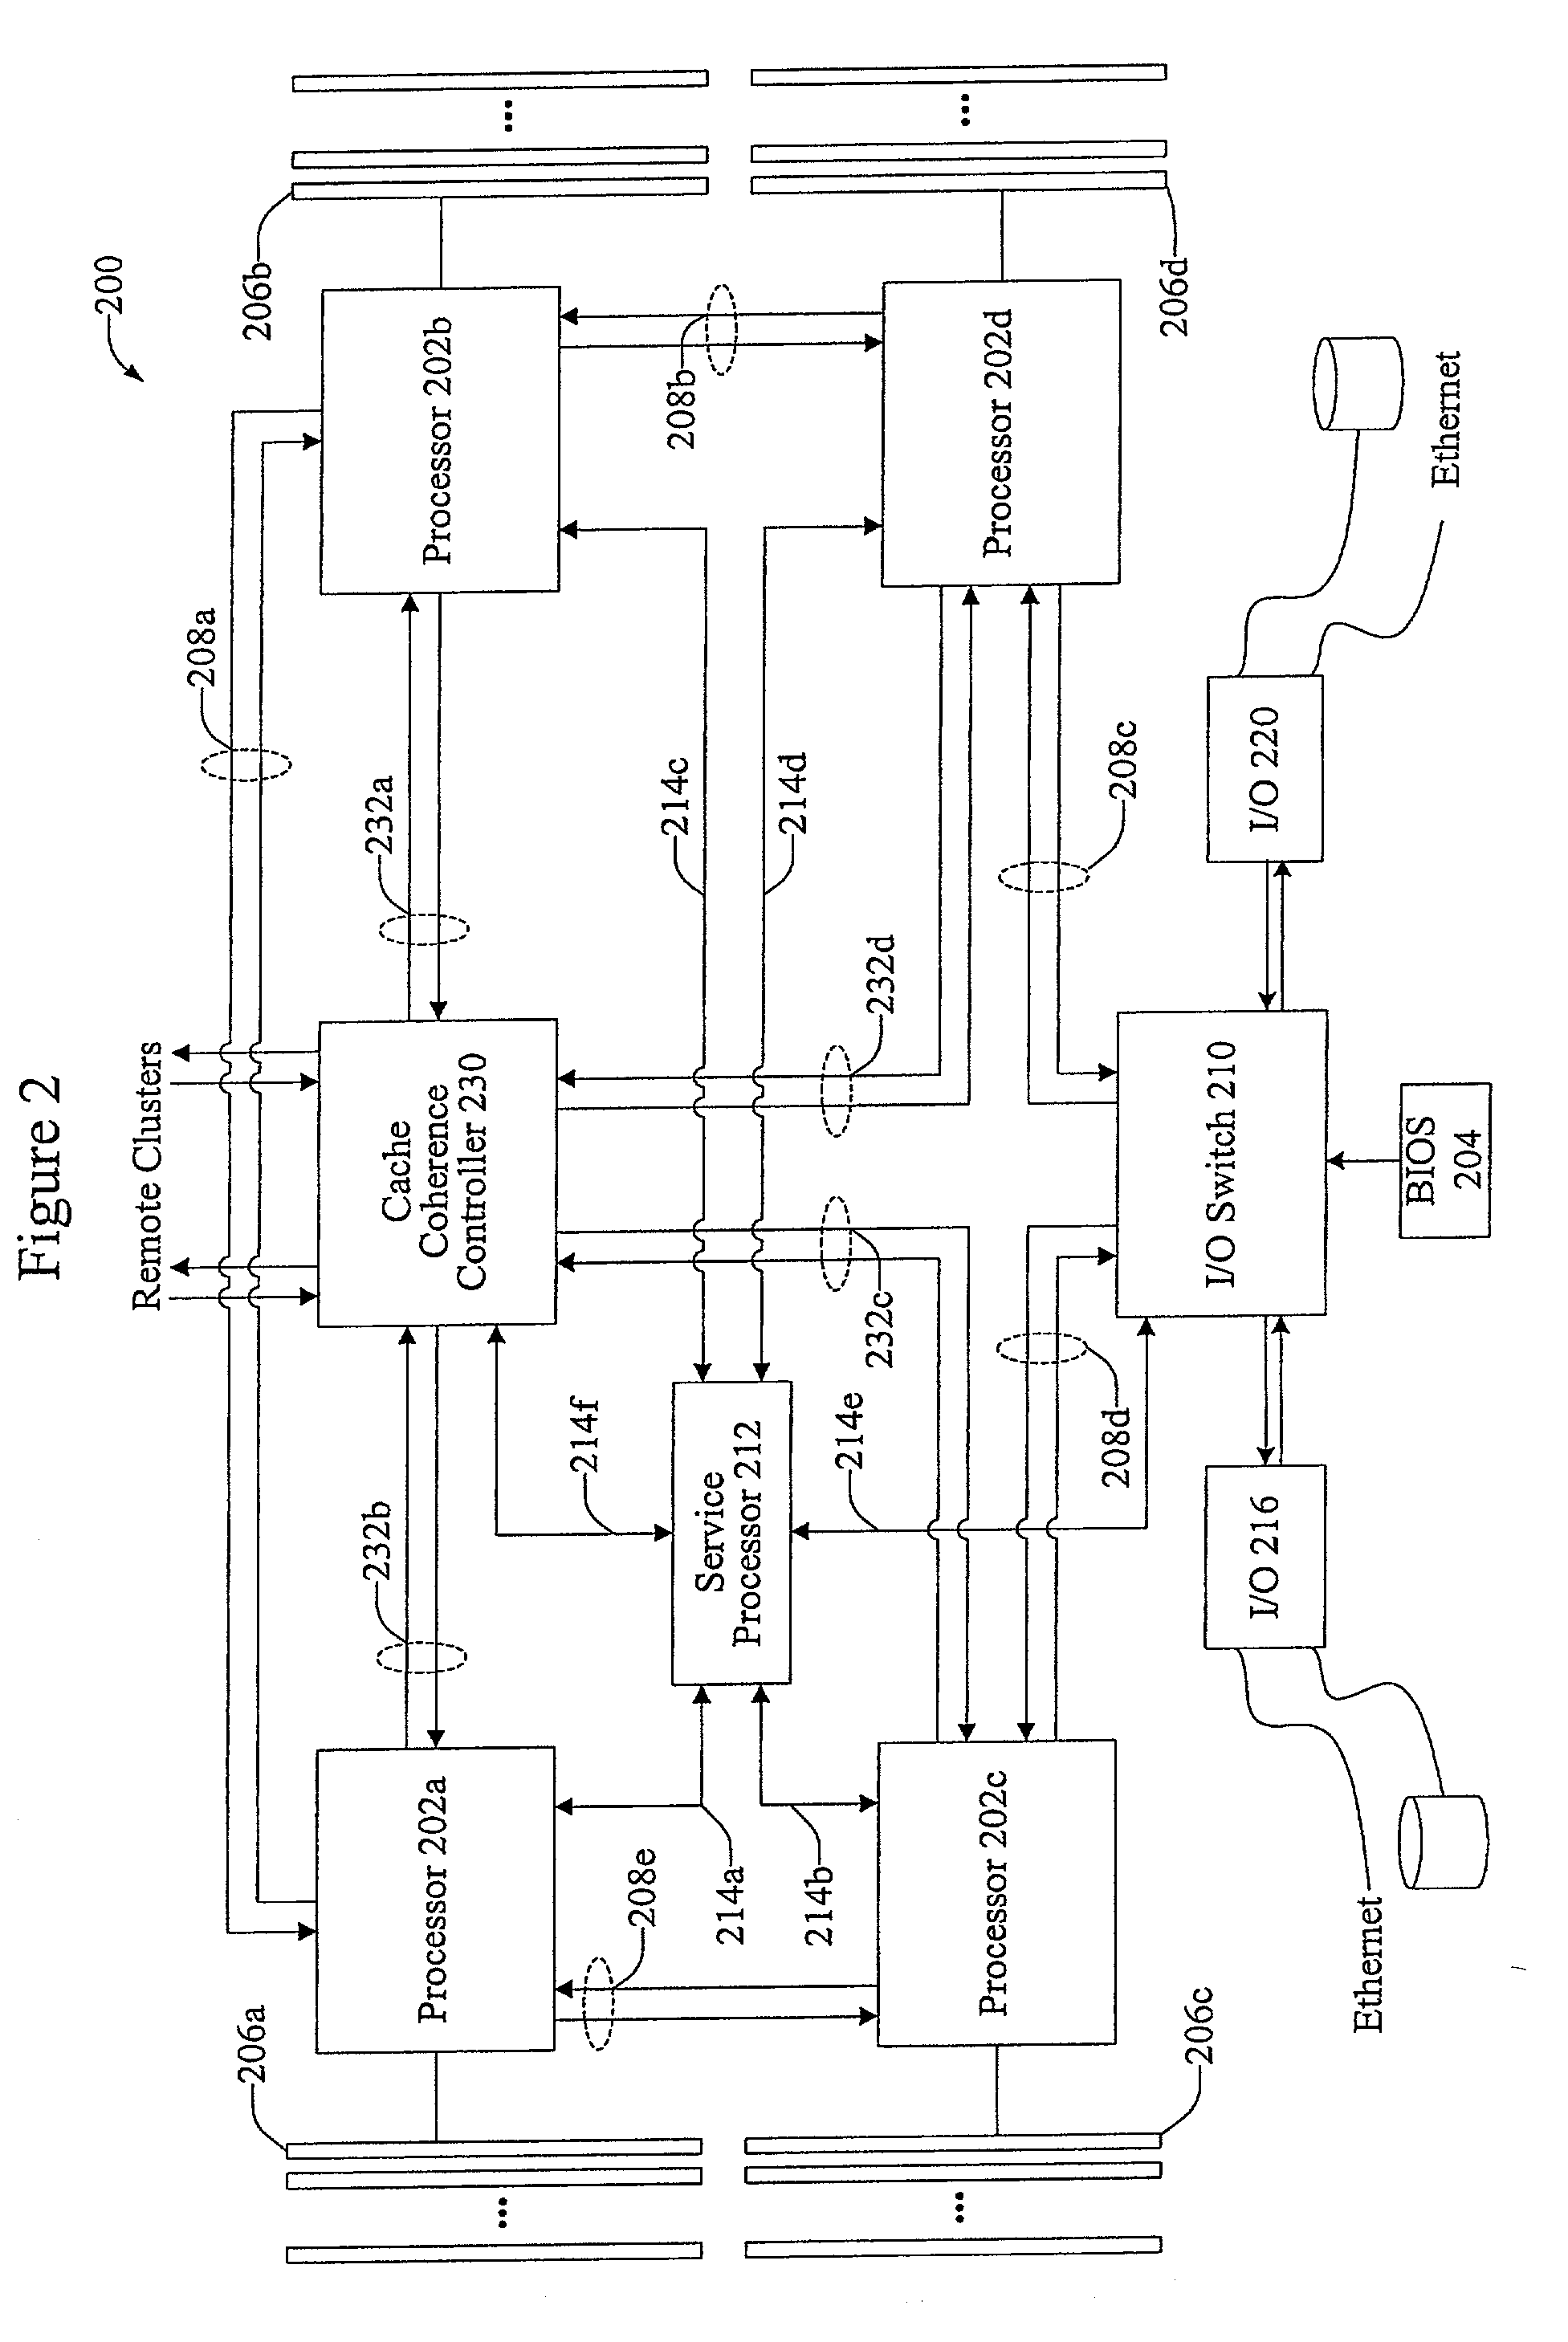 Methods and apparatus for responding to a request cluster